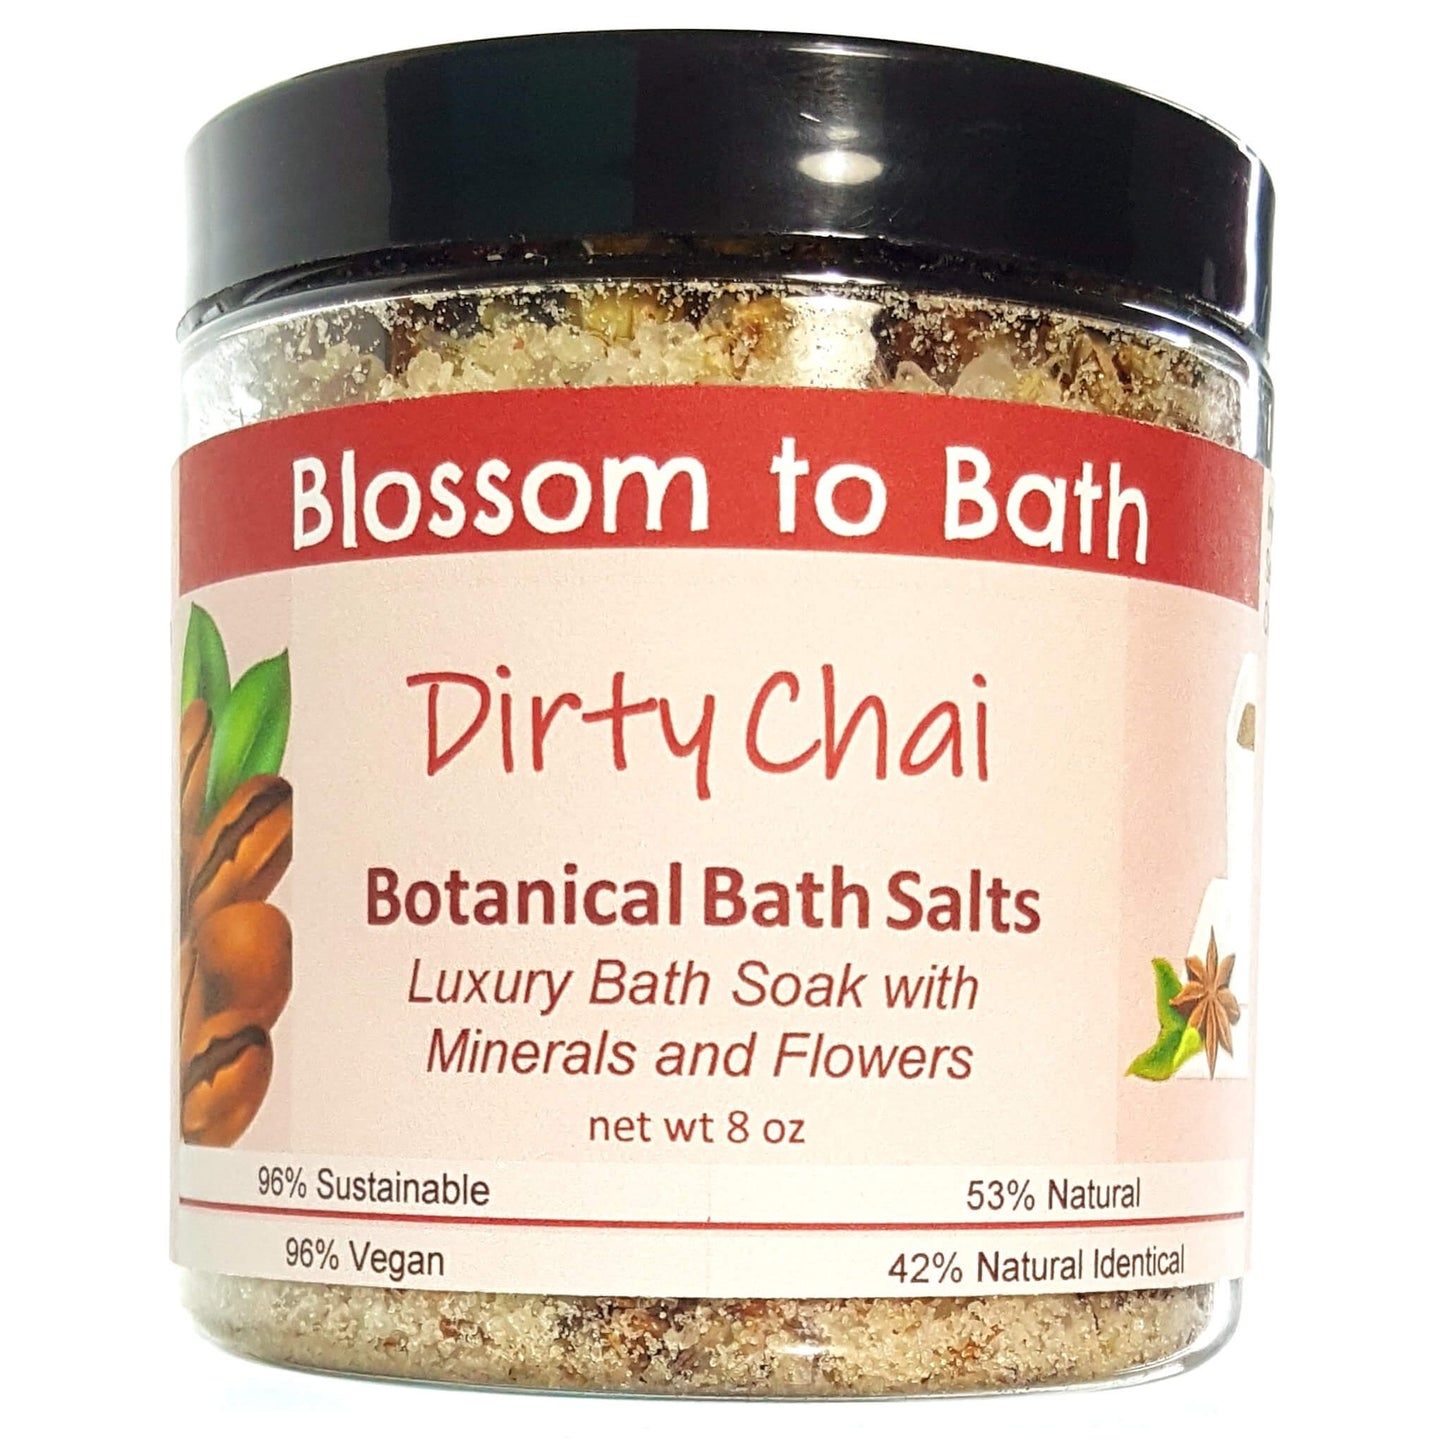 Buy Blossom to Bath Dirty Chai Botanical Bath Salts from Flowersong Soap Studio.  A hand selected variety of skin loving botanicals and mineral rich salts for a unique, luxurious soaking experience  A shot of rich espresso in a swirl of exotic warm clove and cardamom.